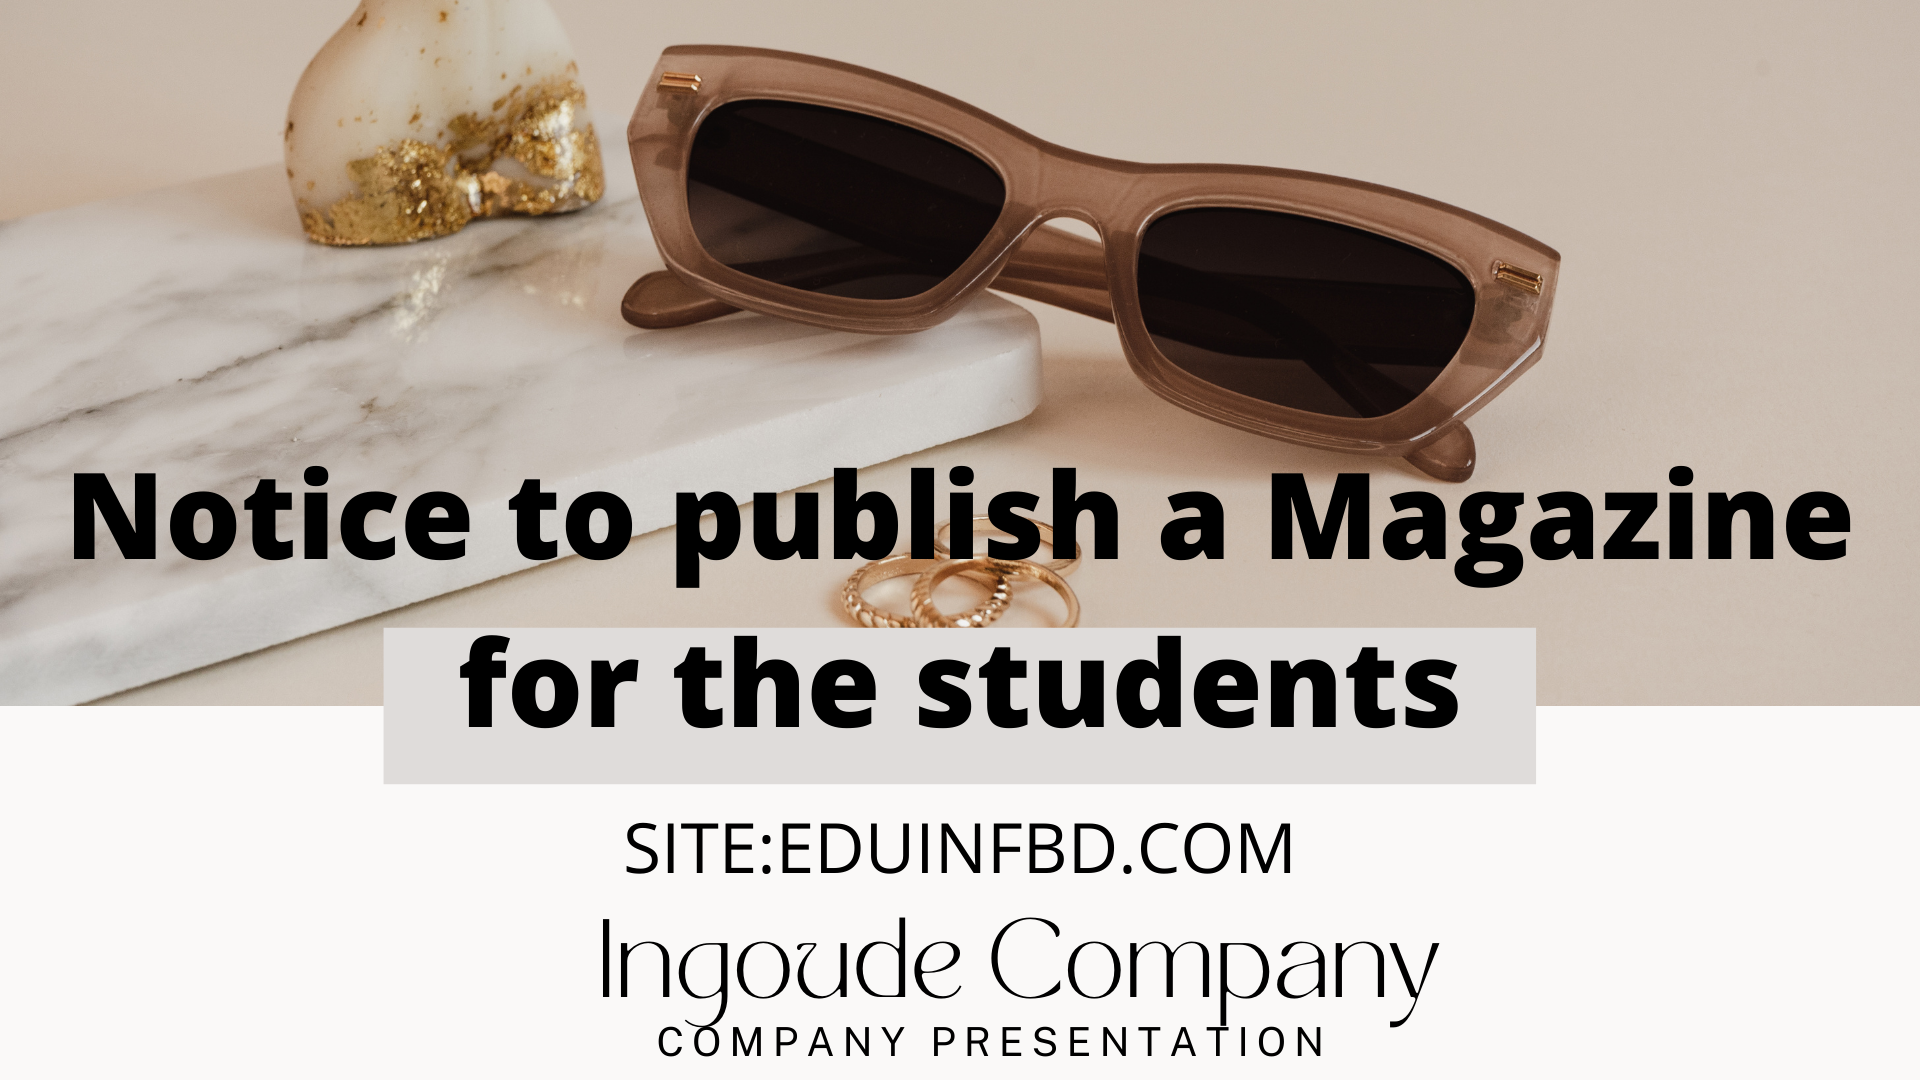 Notice to publish a Magazine for the students